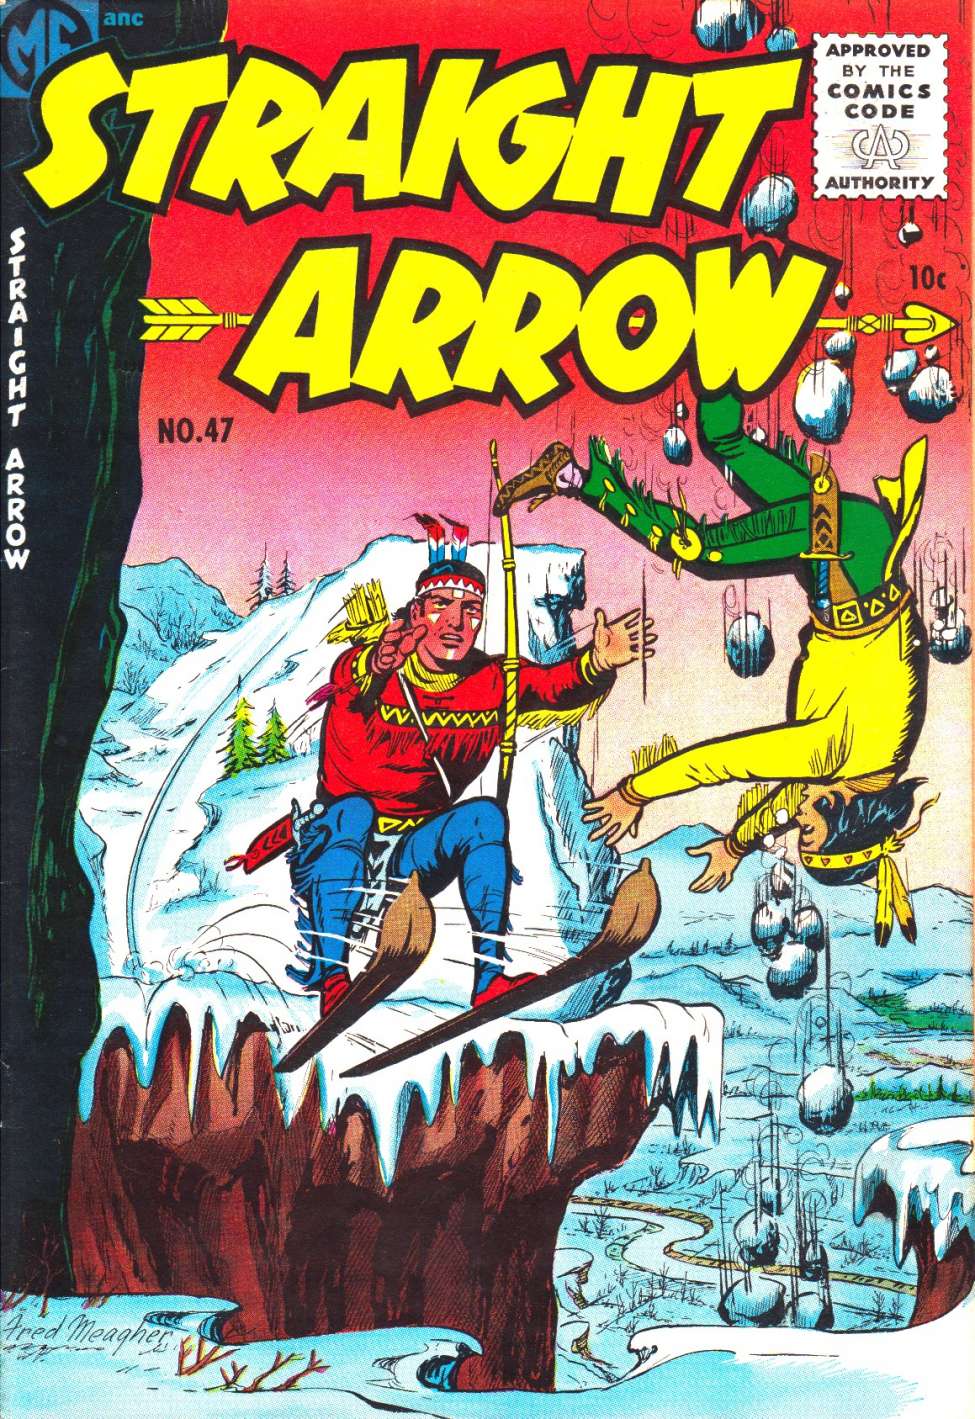 Book Cover For Straight Arrow 47